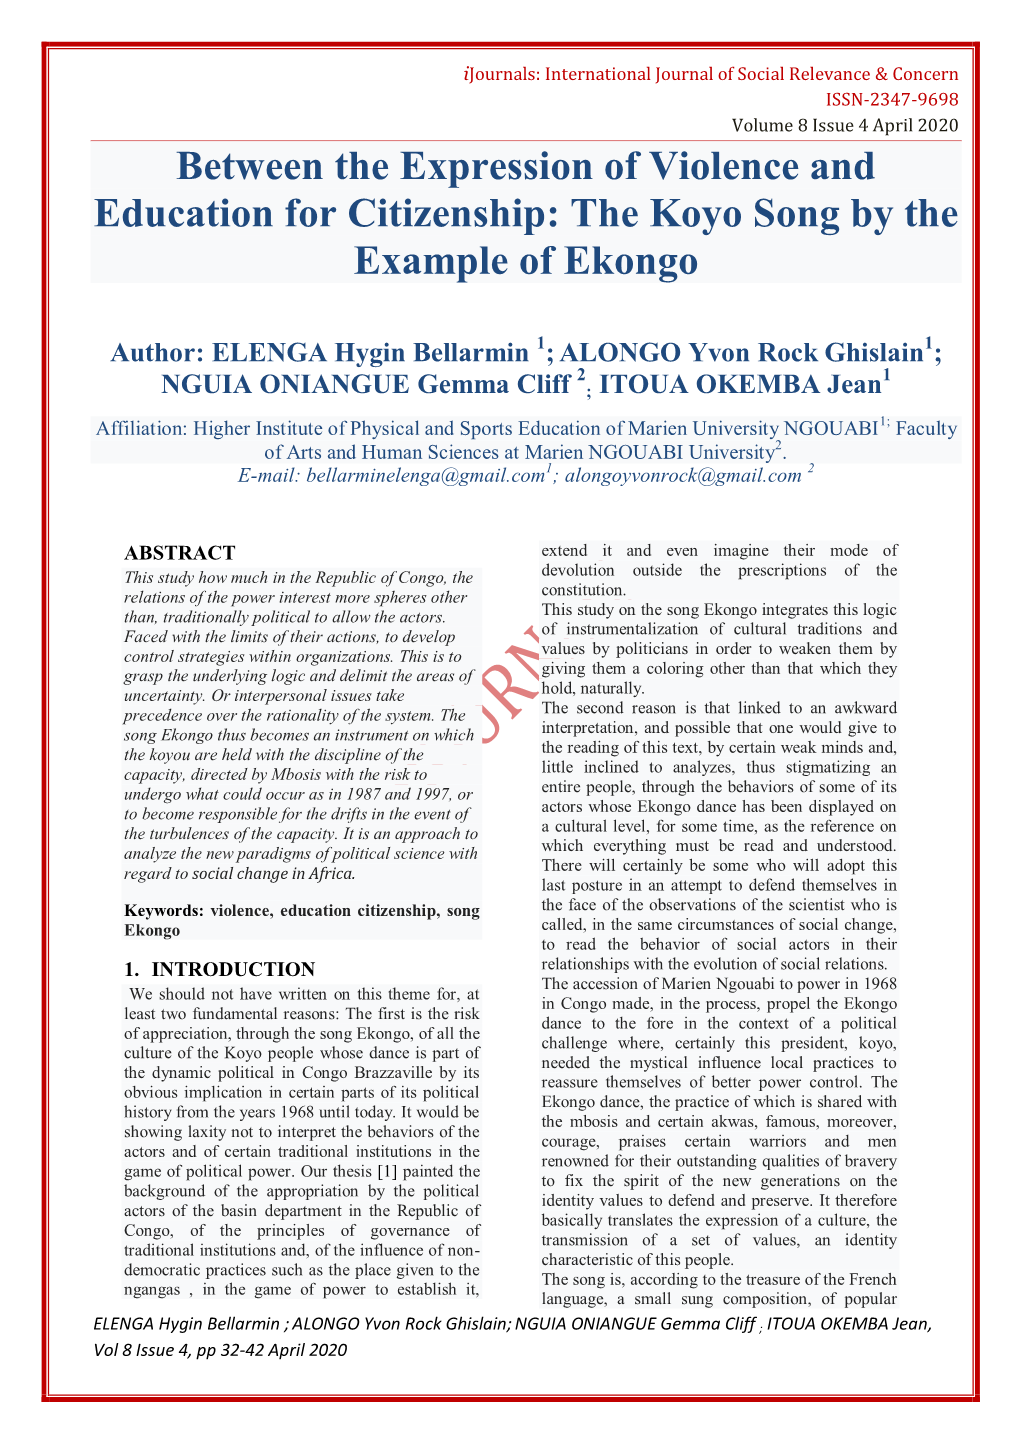 Between the Expression of Violence and Education for Citizenship: the Koyo Song by the Example of Ekongo